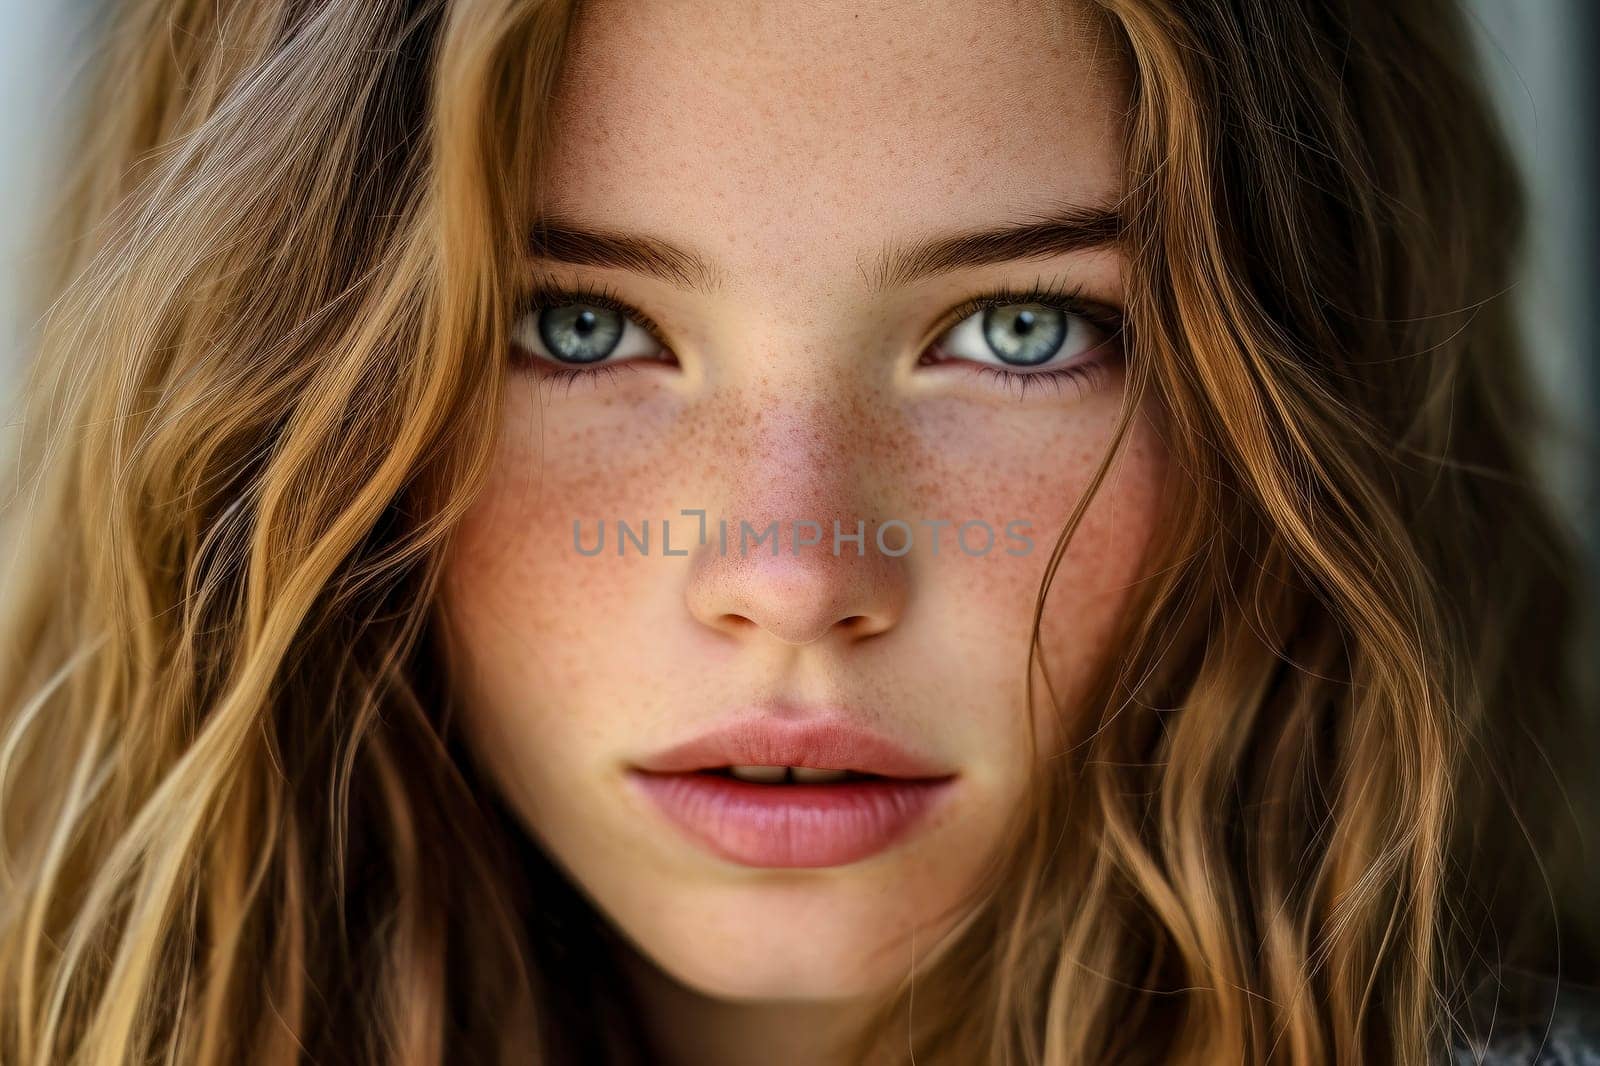 Explore the mesmerizing beauty and profound gaze of this stunning teenage girl in a captivating close-up.